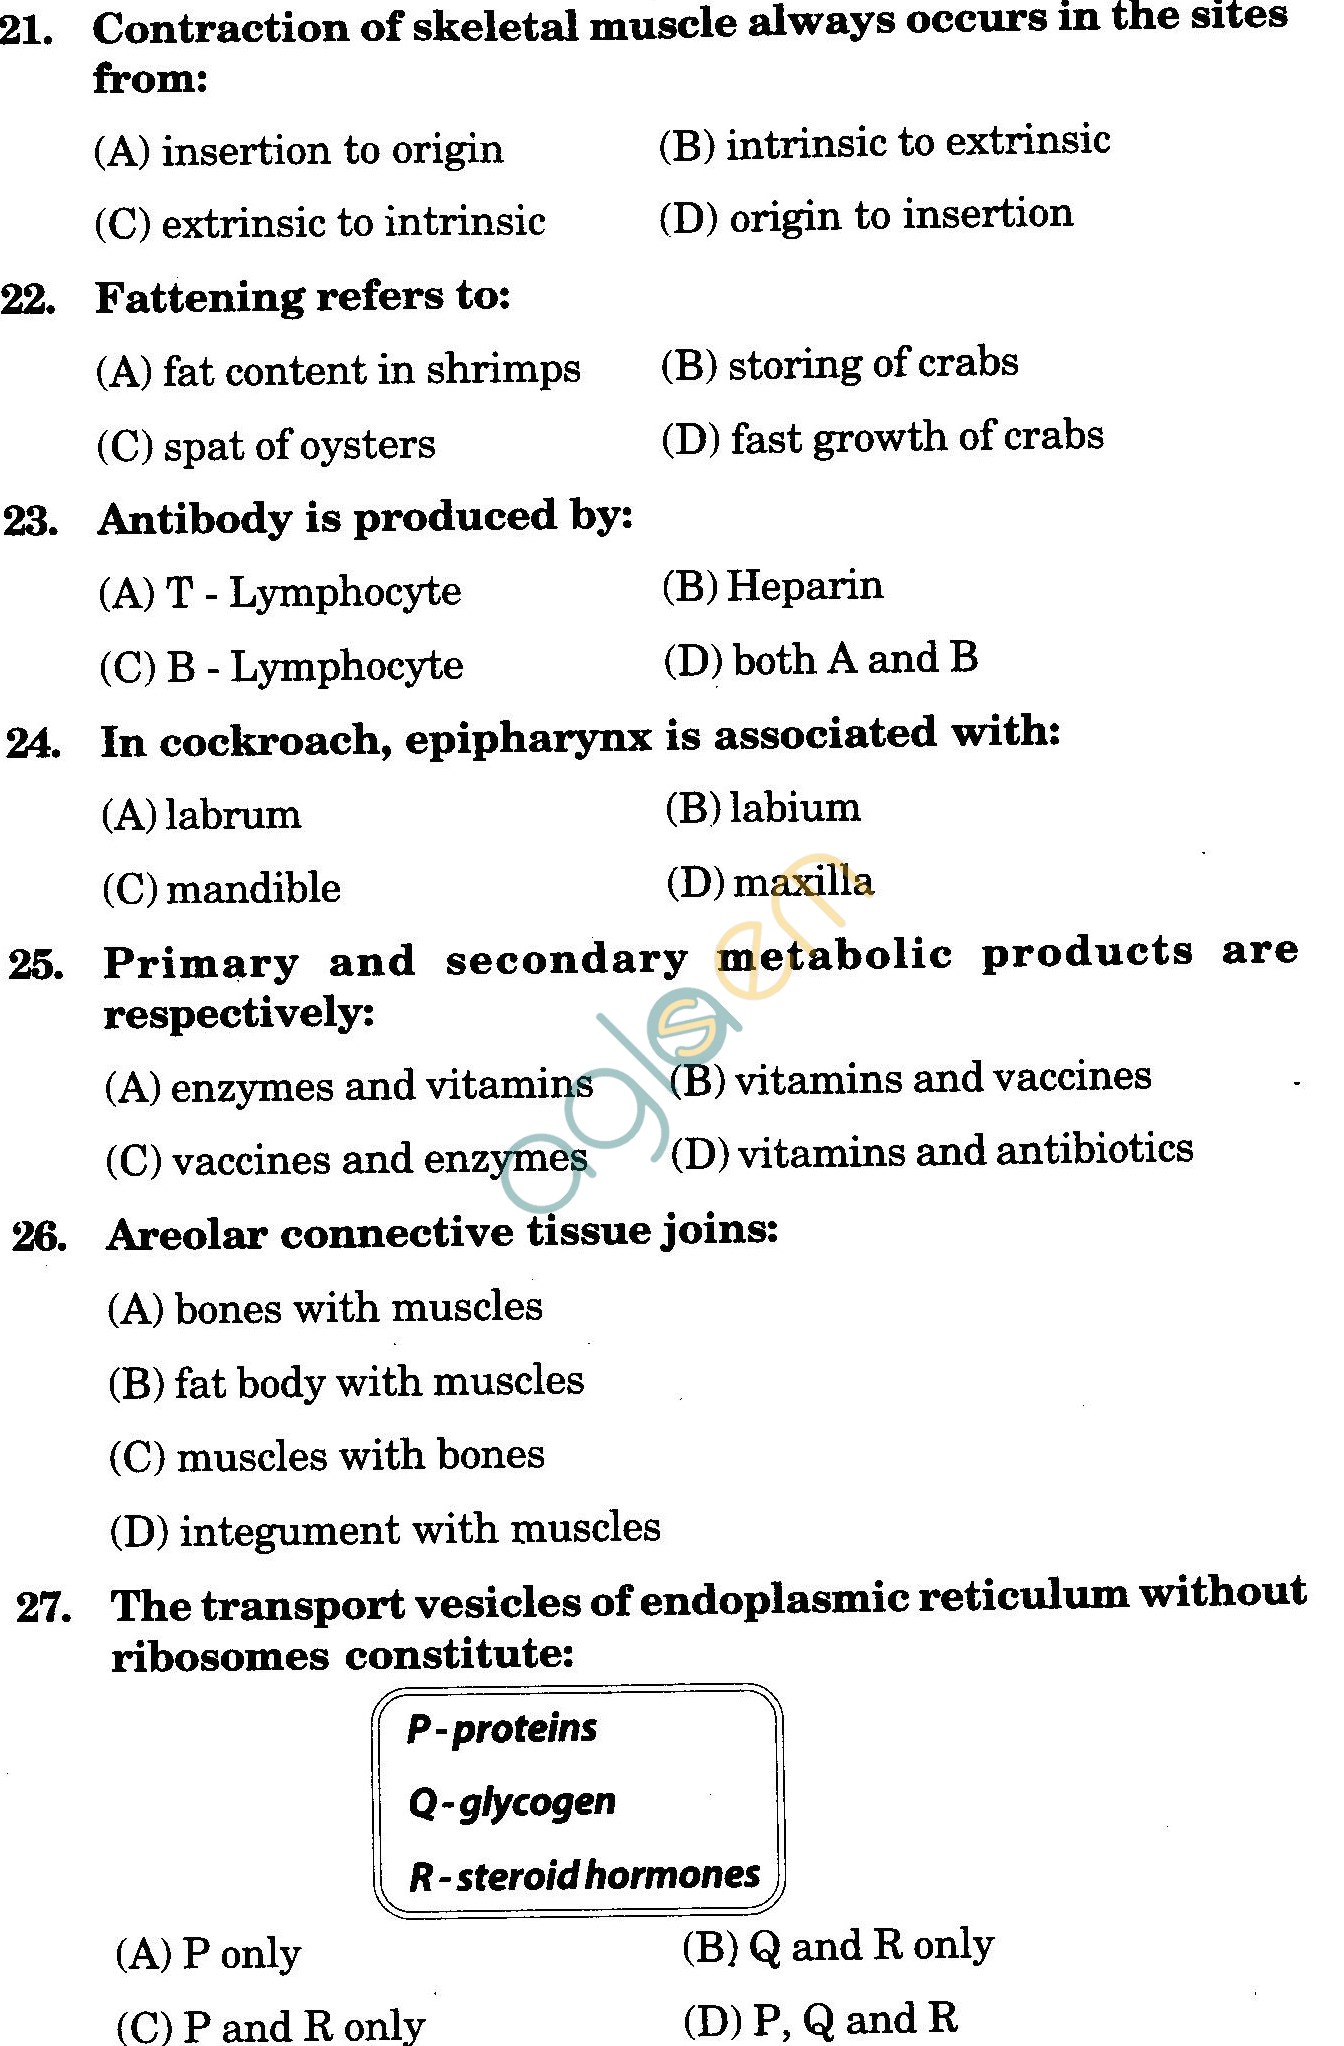 NSTSE 2009 Class XI PCB Question Paper with Answers - Biology